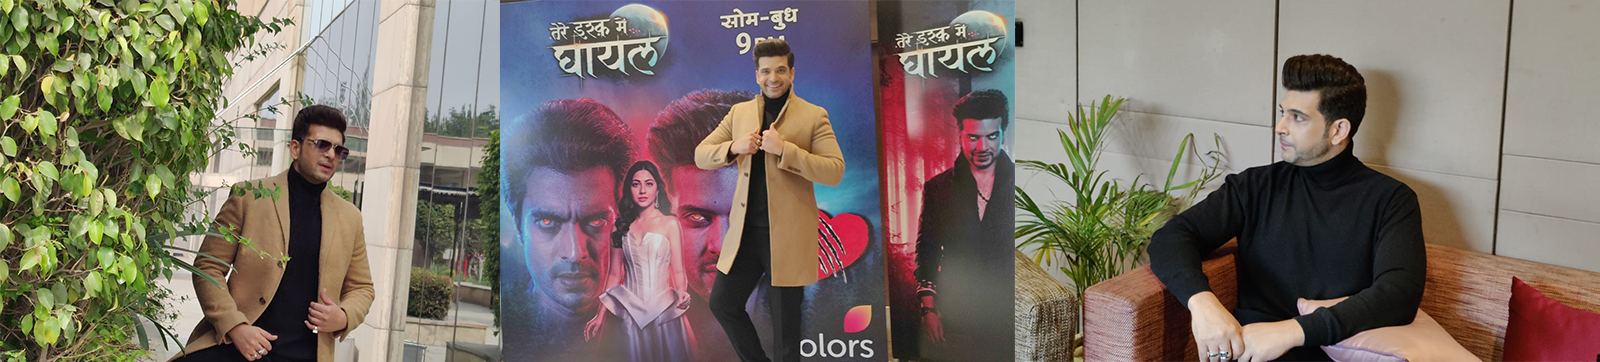 Karan Kundrra: Chandigarh Has a Separate Place in My Heart